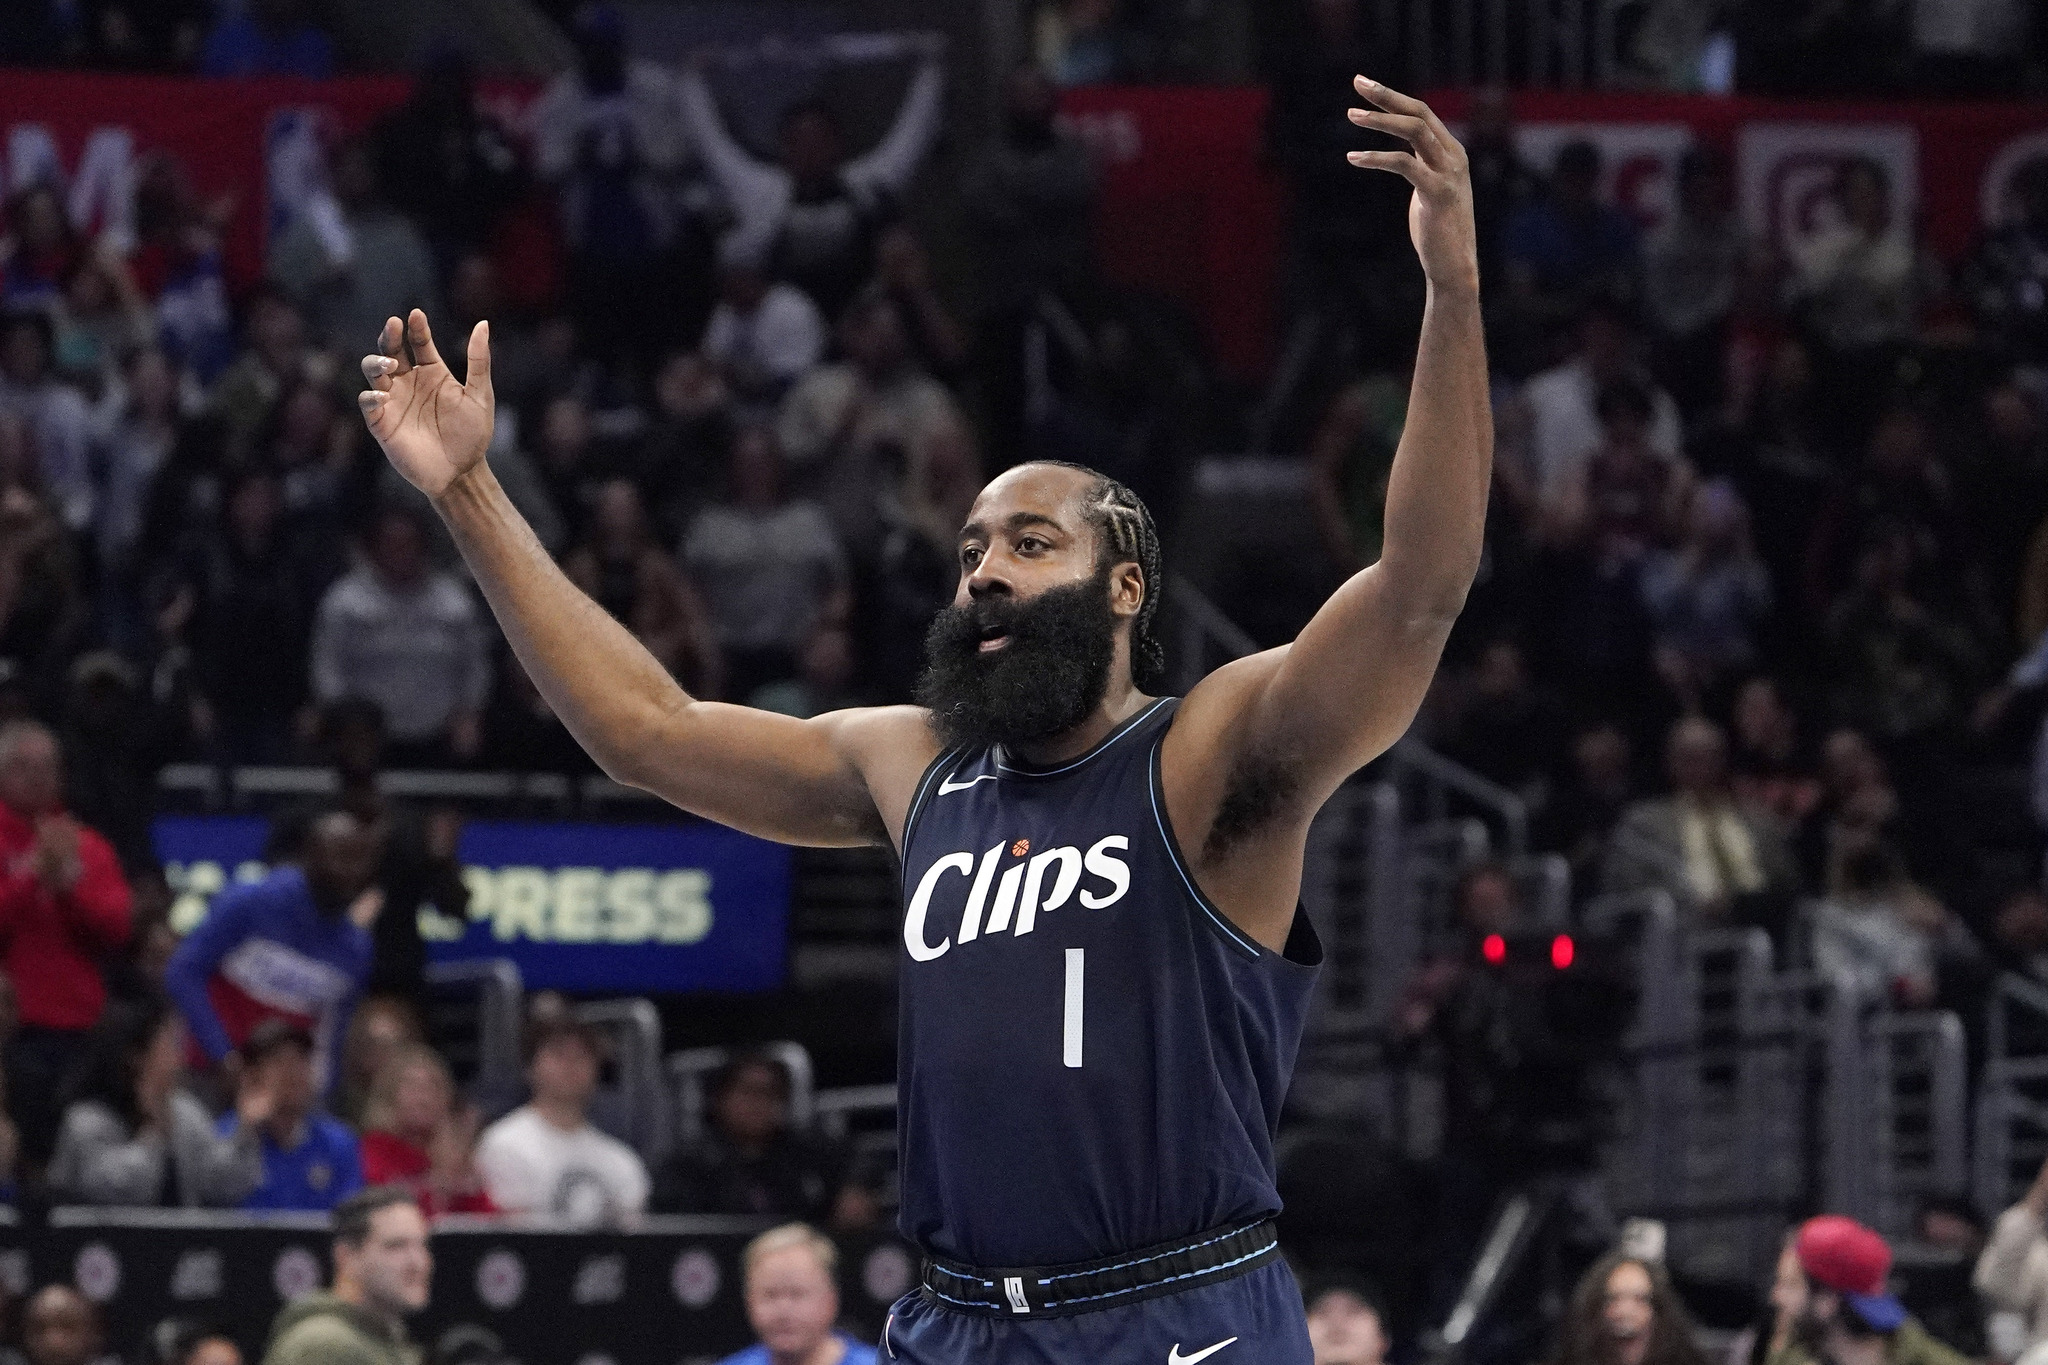 Los Angeles Clippers guard James Harden celebrates after scoring